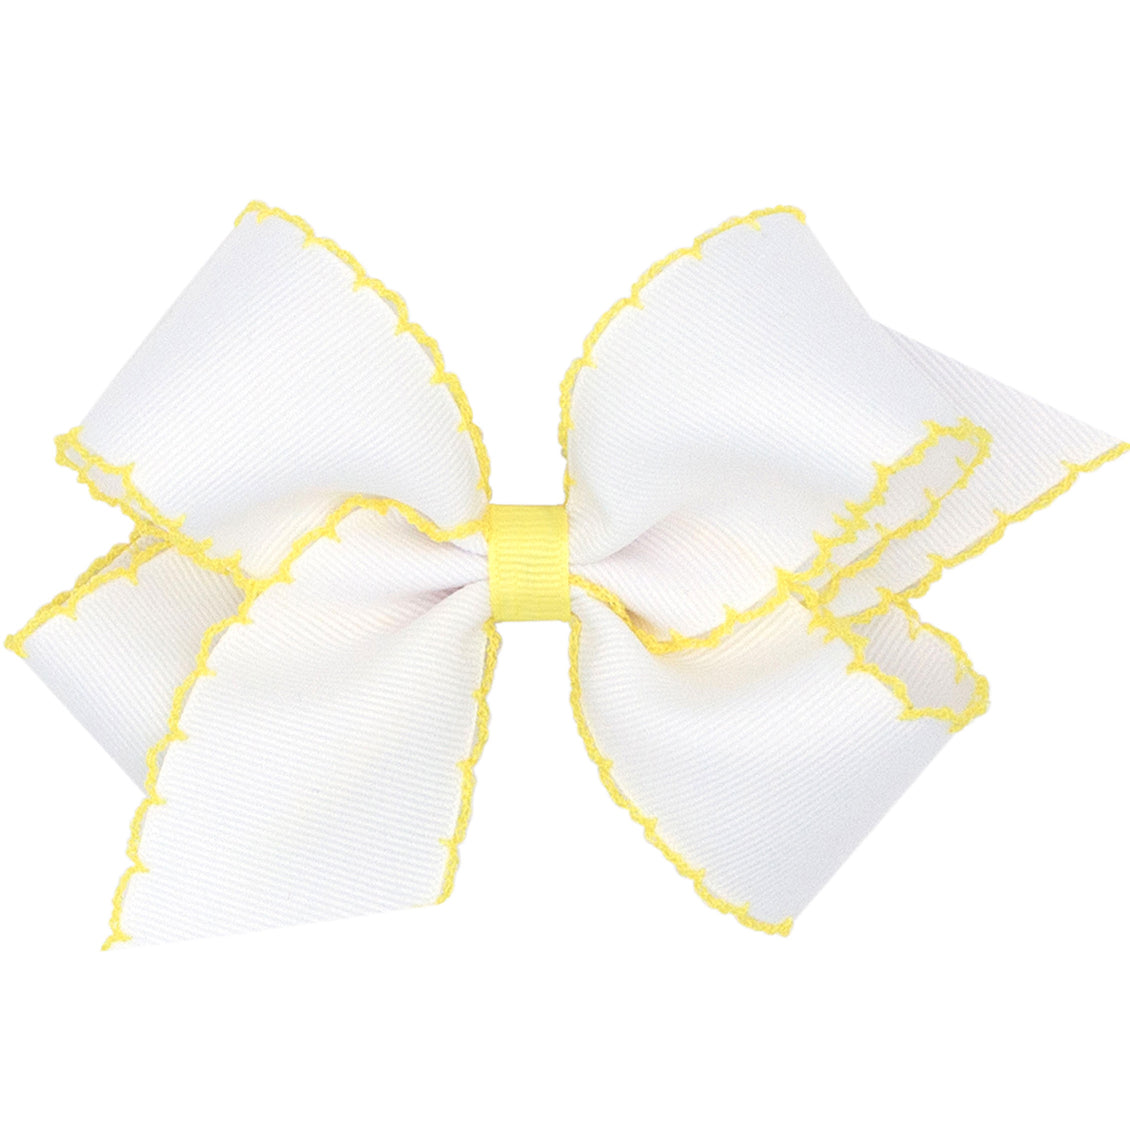 Wee Ones Moonstitch Bow - White with Yellow Trim (2 Sizes)